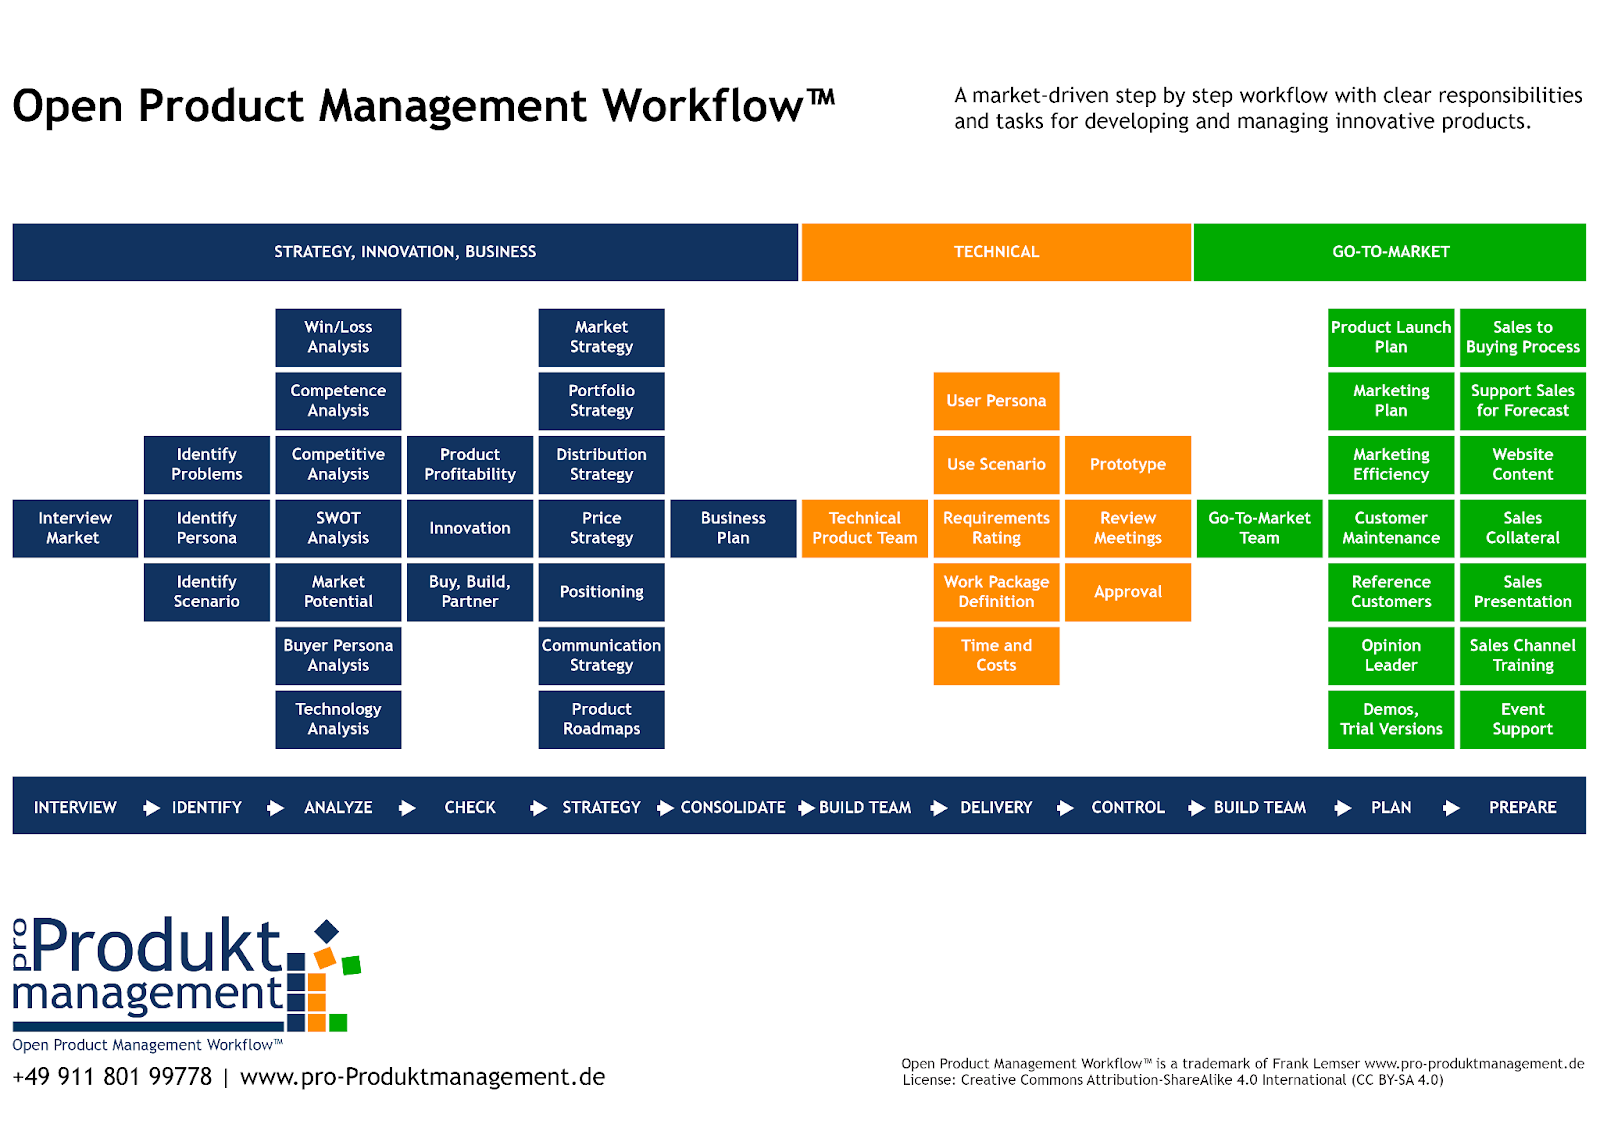 Open Product Management Workflowの解説図。